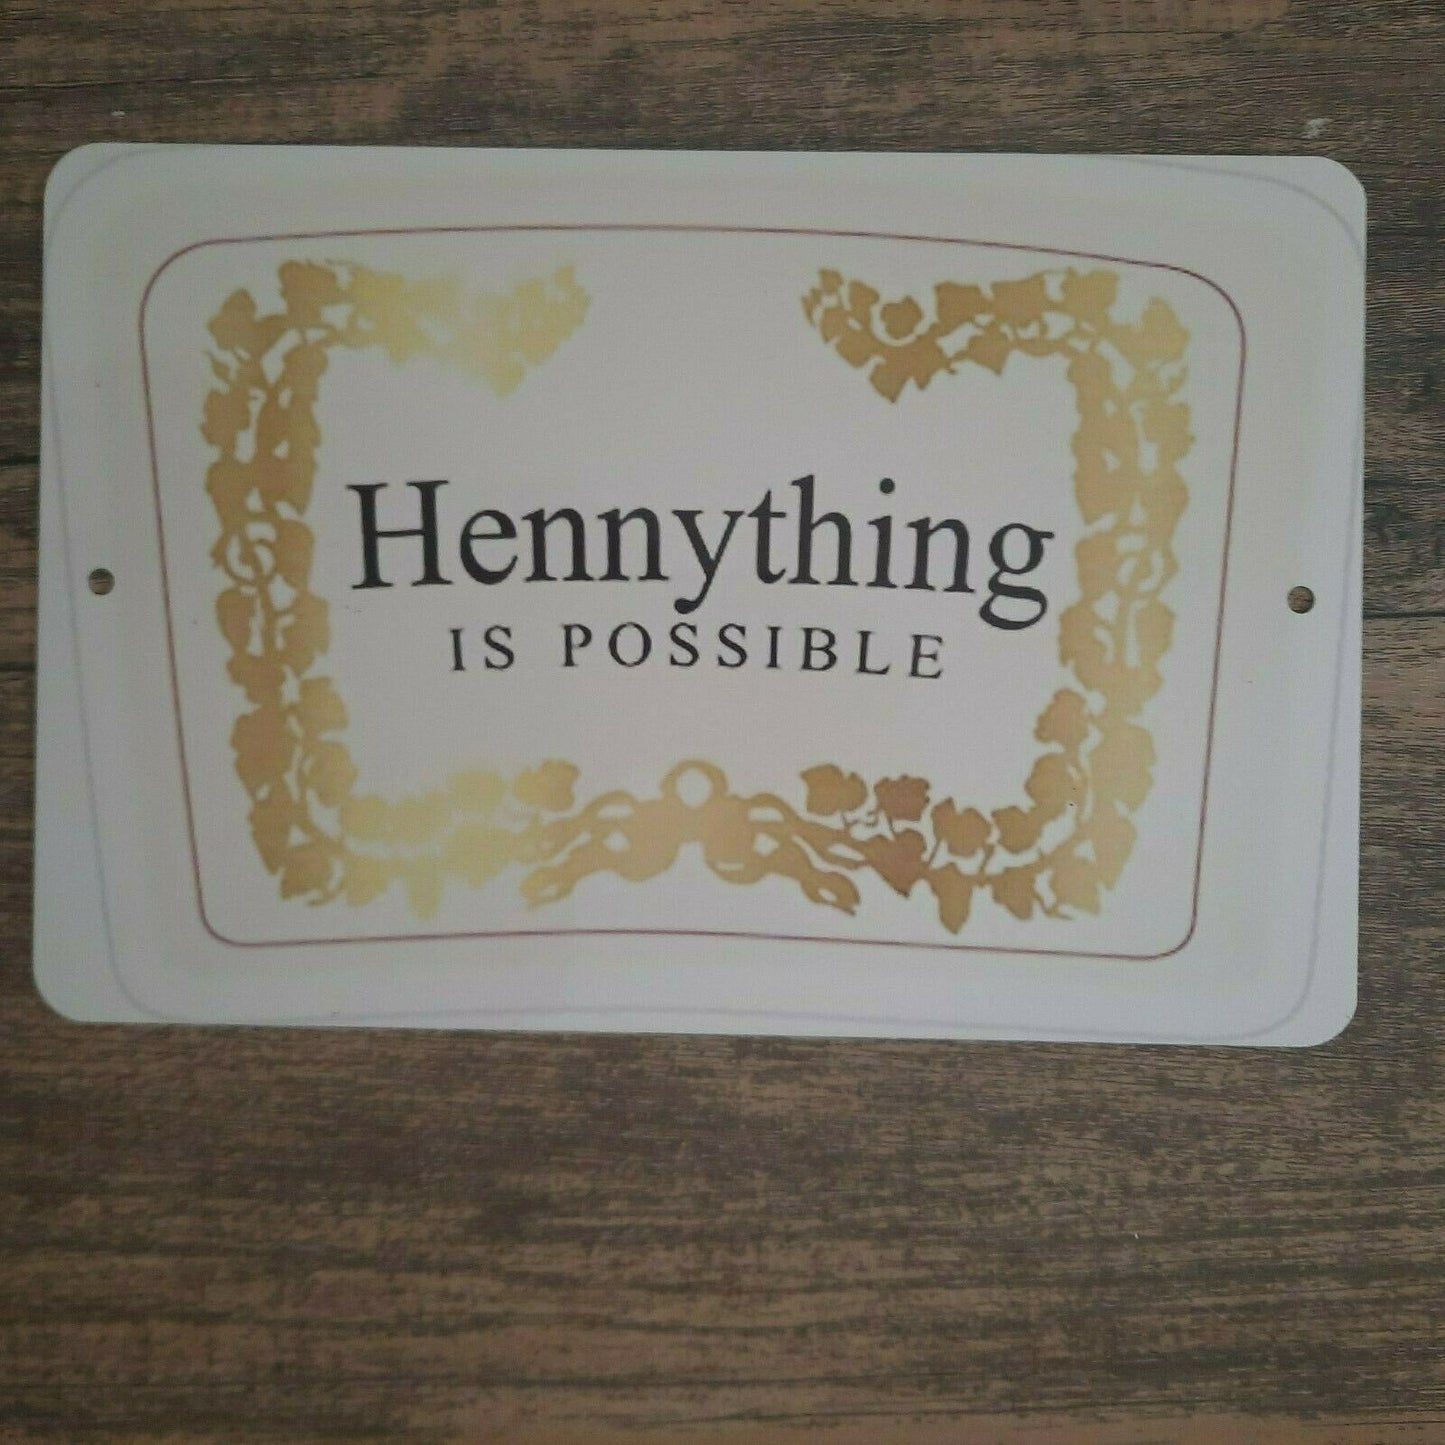 Hennything is Possible 8x12 Metal Wall Bar Sign Alcohol Liquor